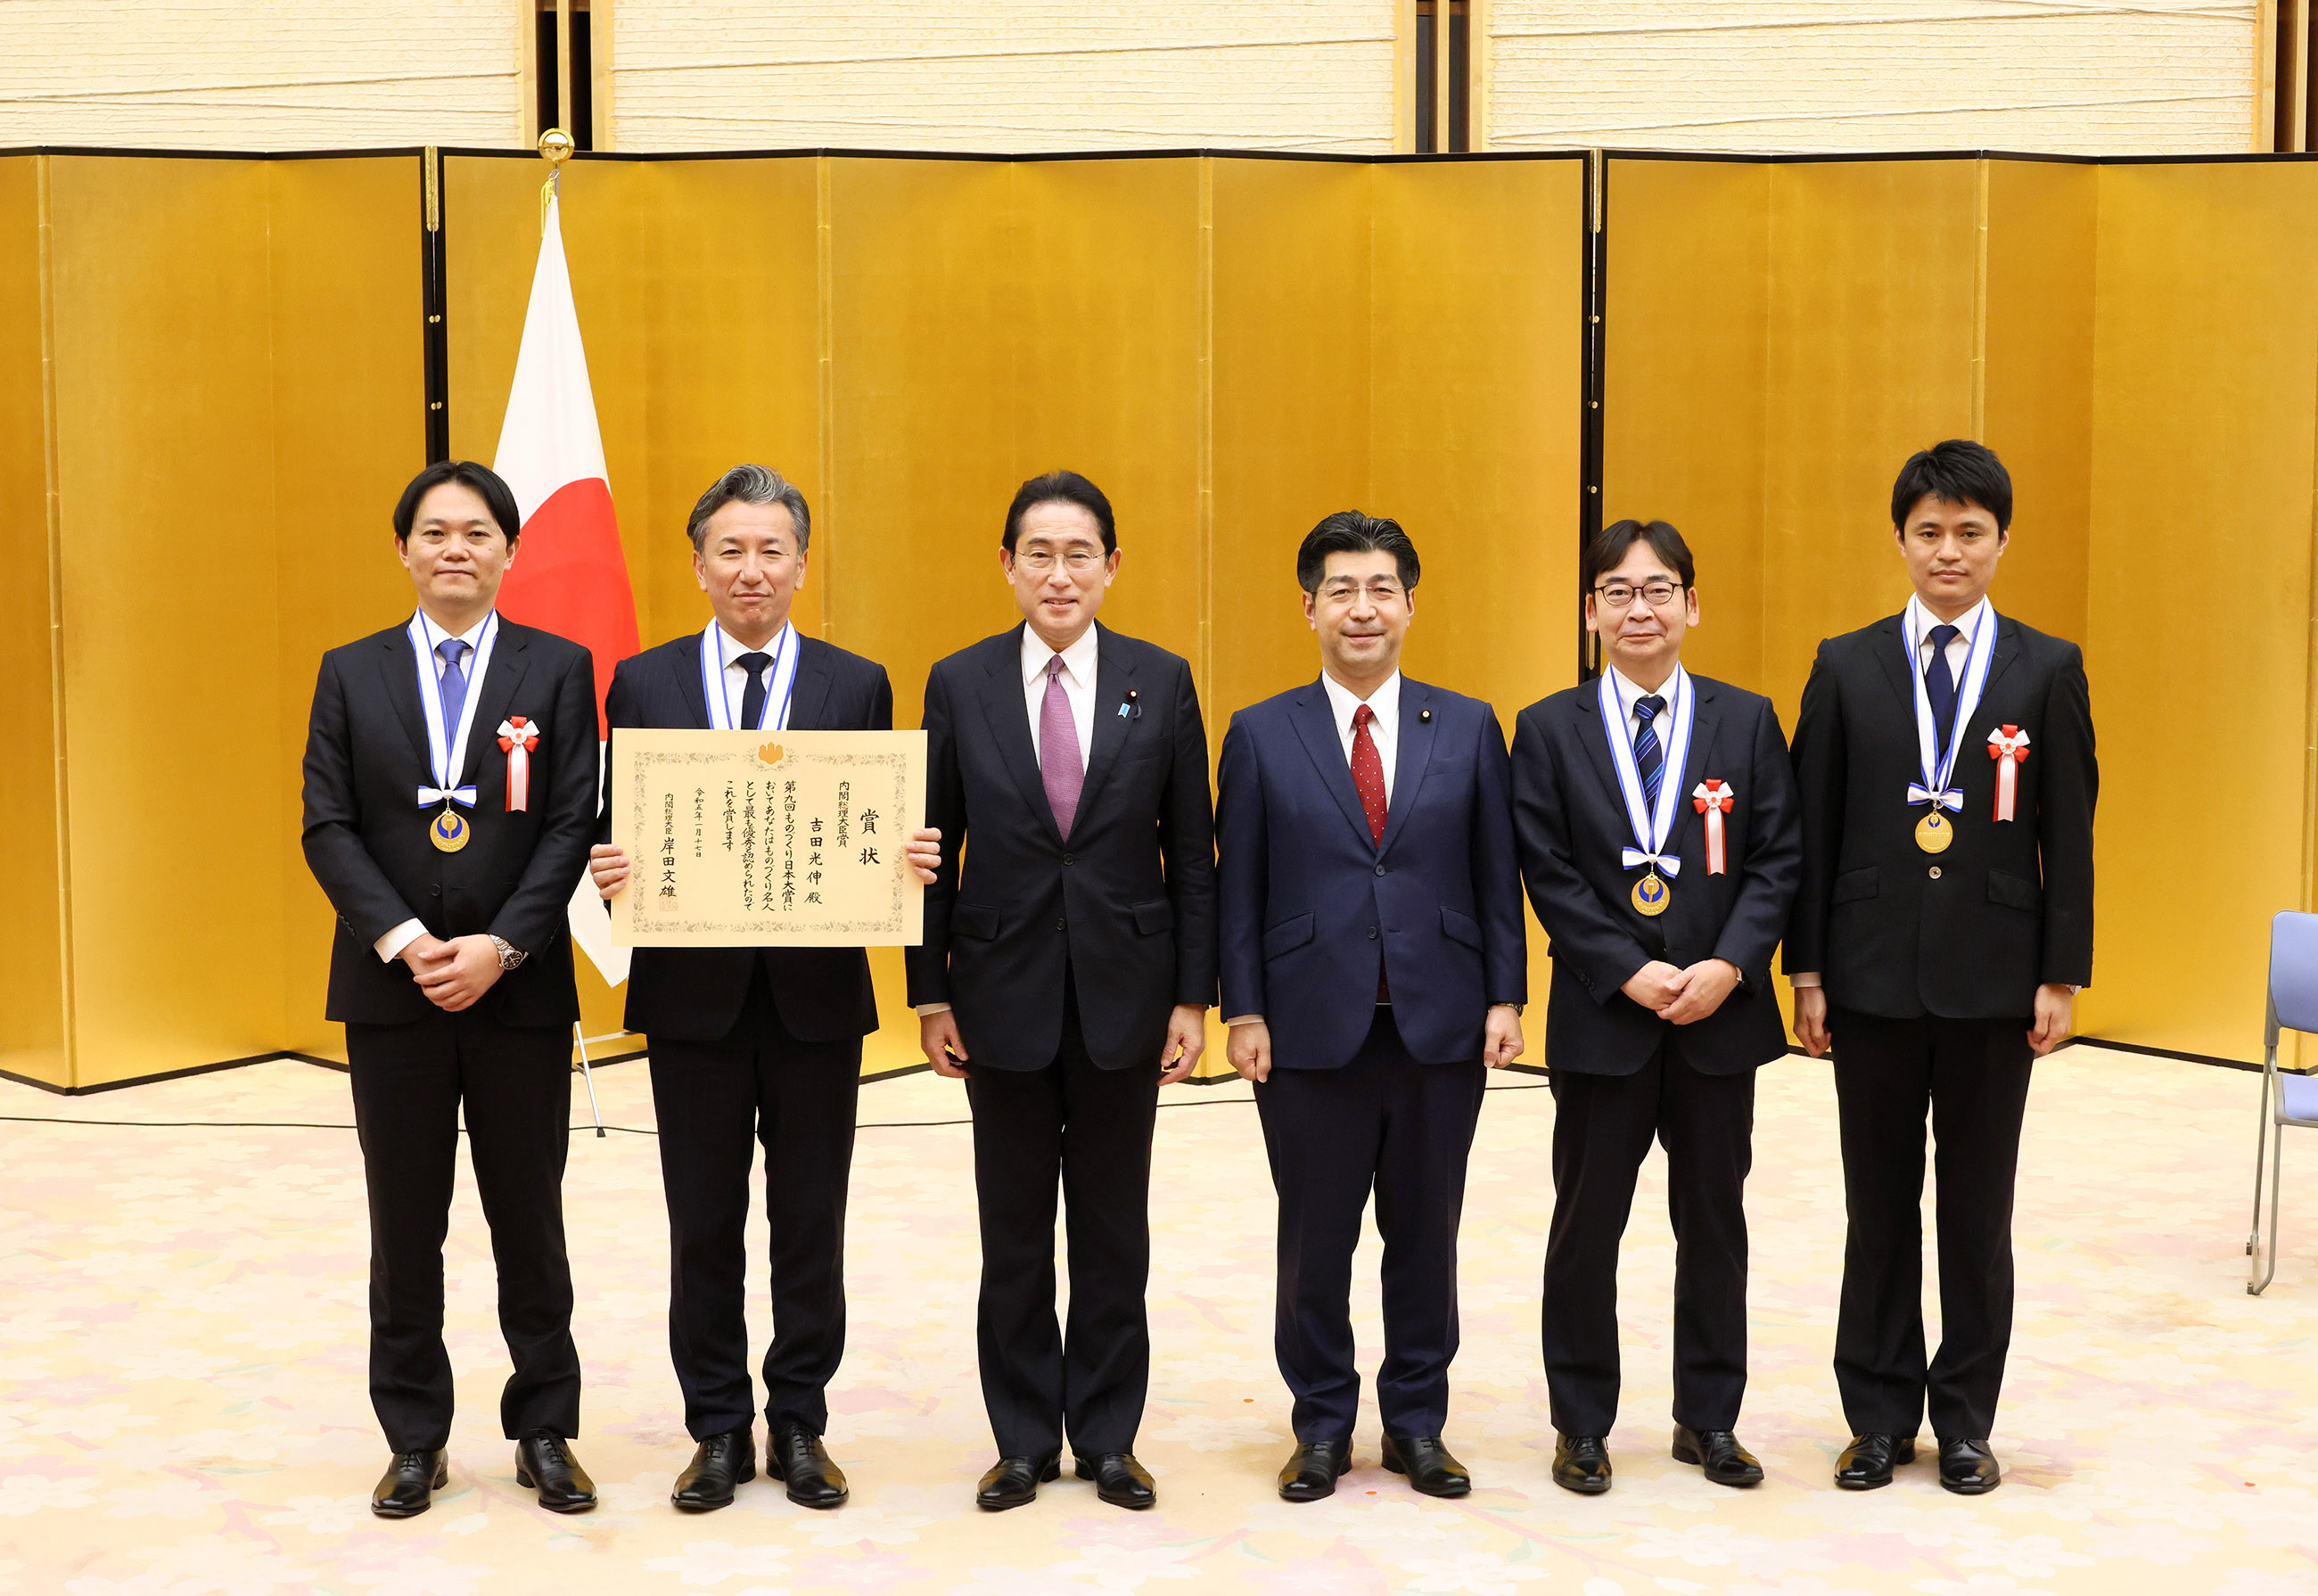 Commemorative photo session with award winners (1)